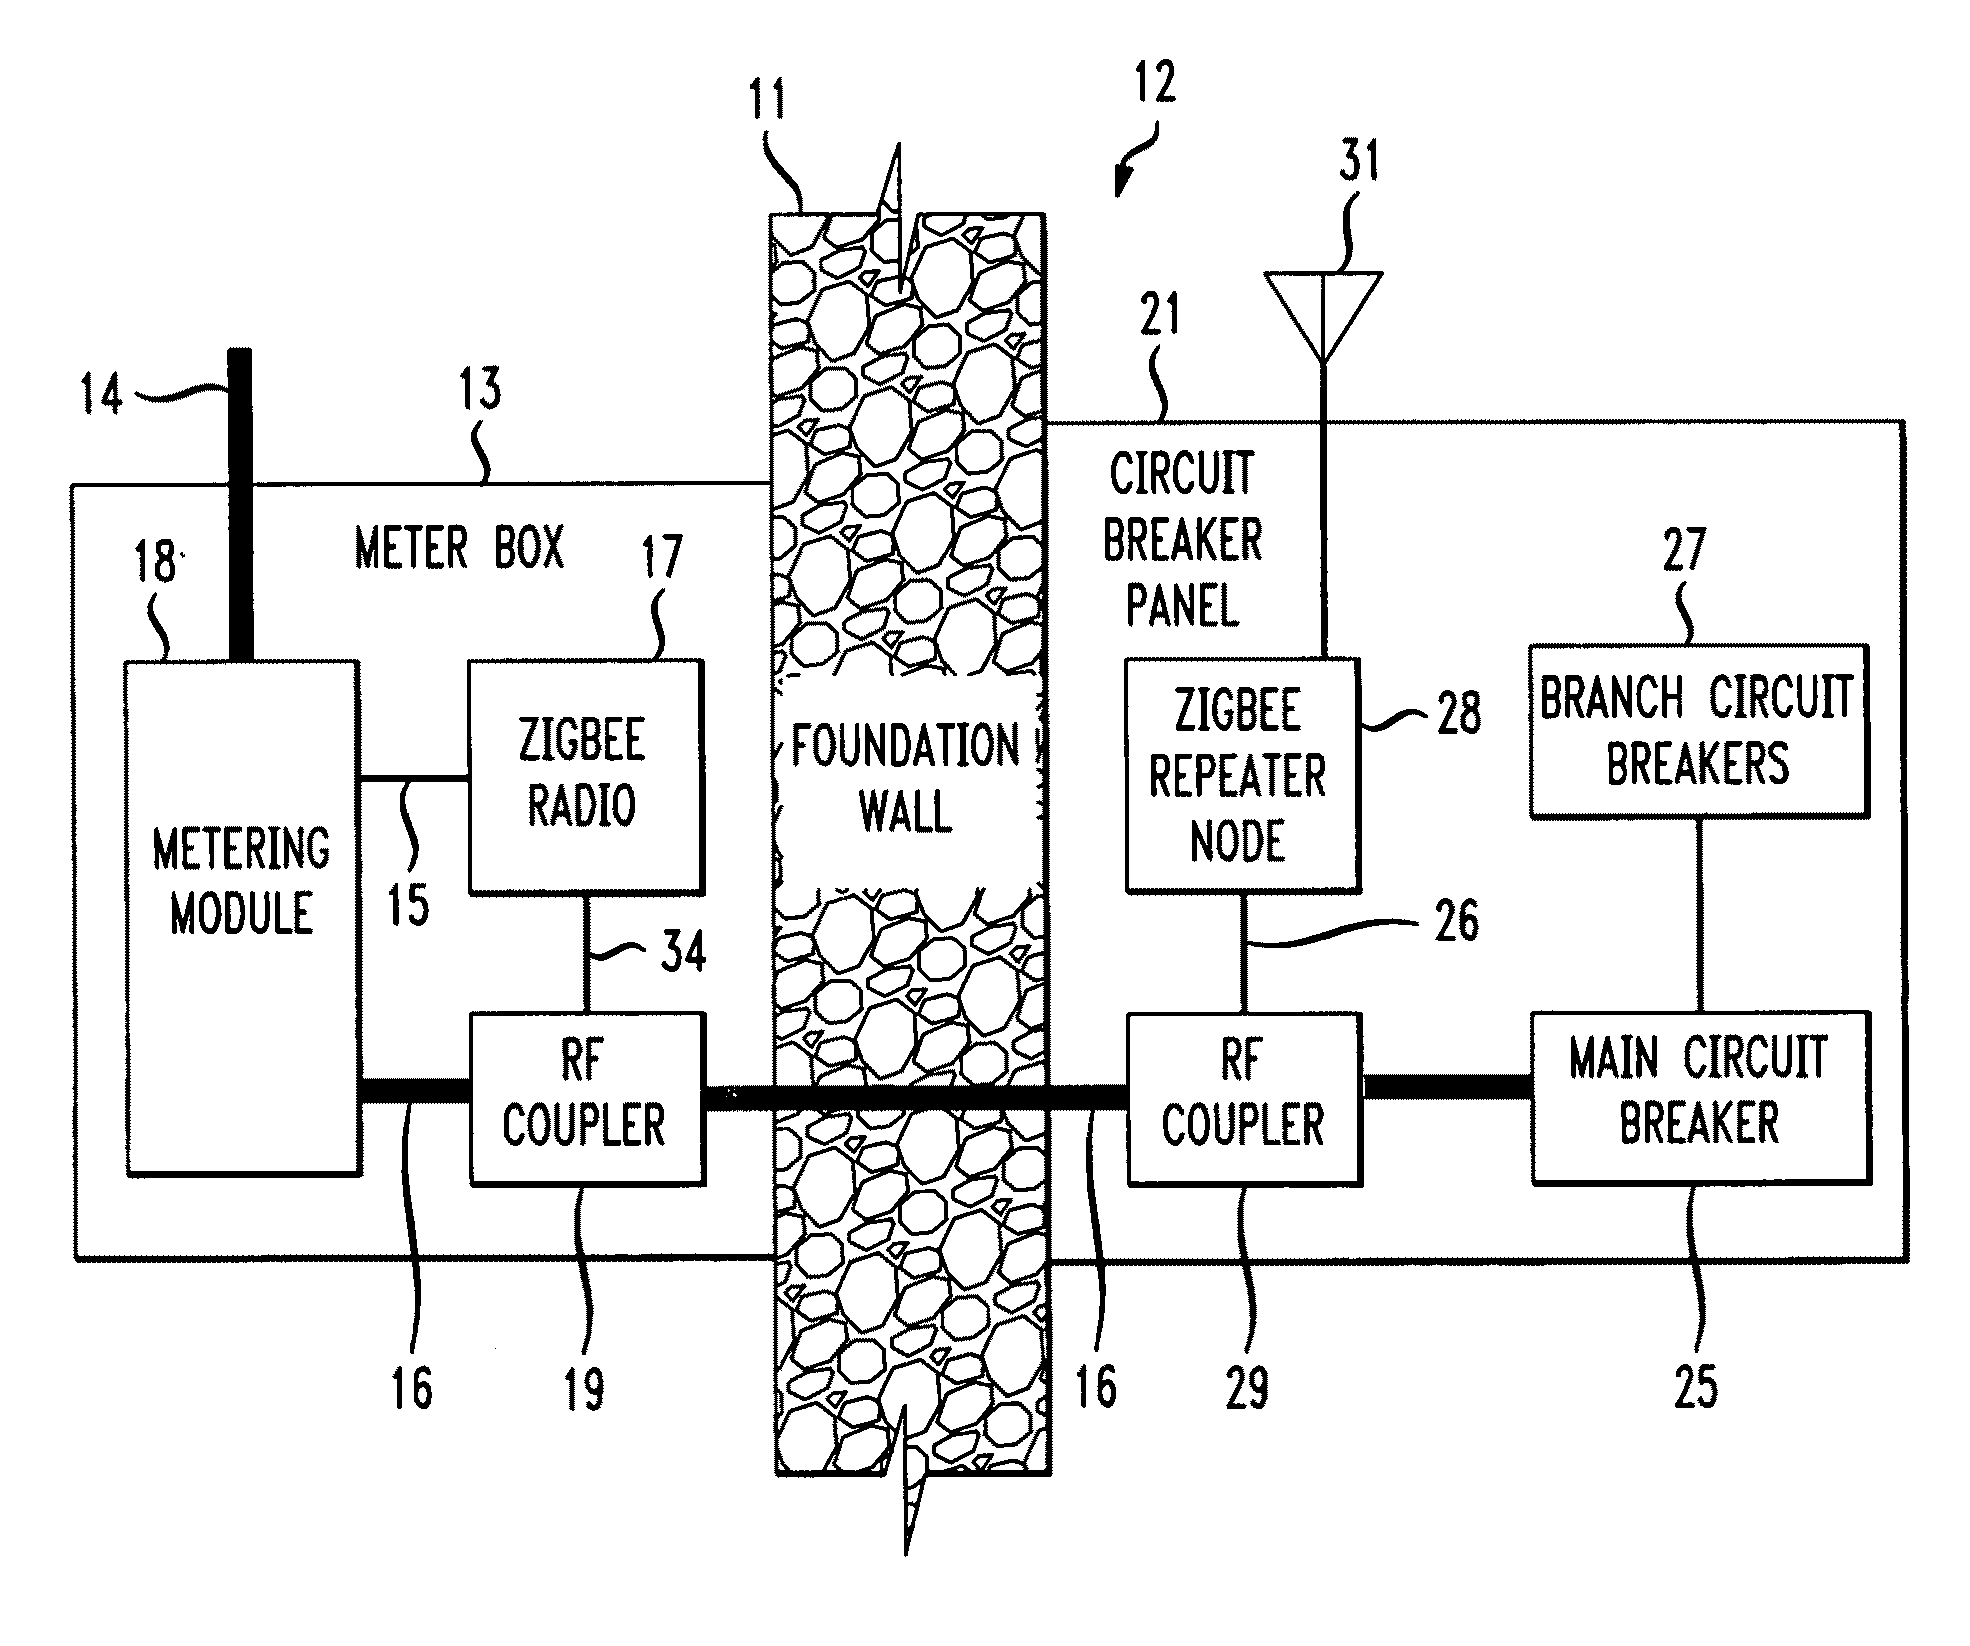 Using surface wave propagation to communicate an information-bearing signal through a barrier